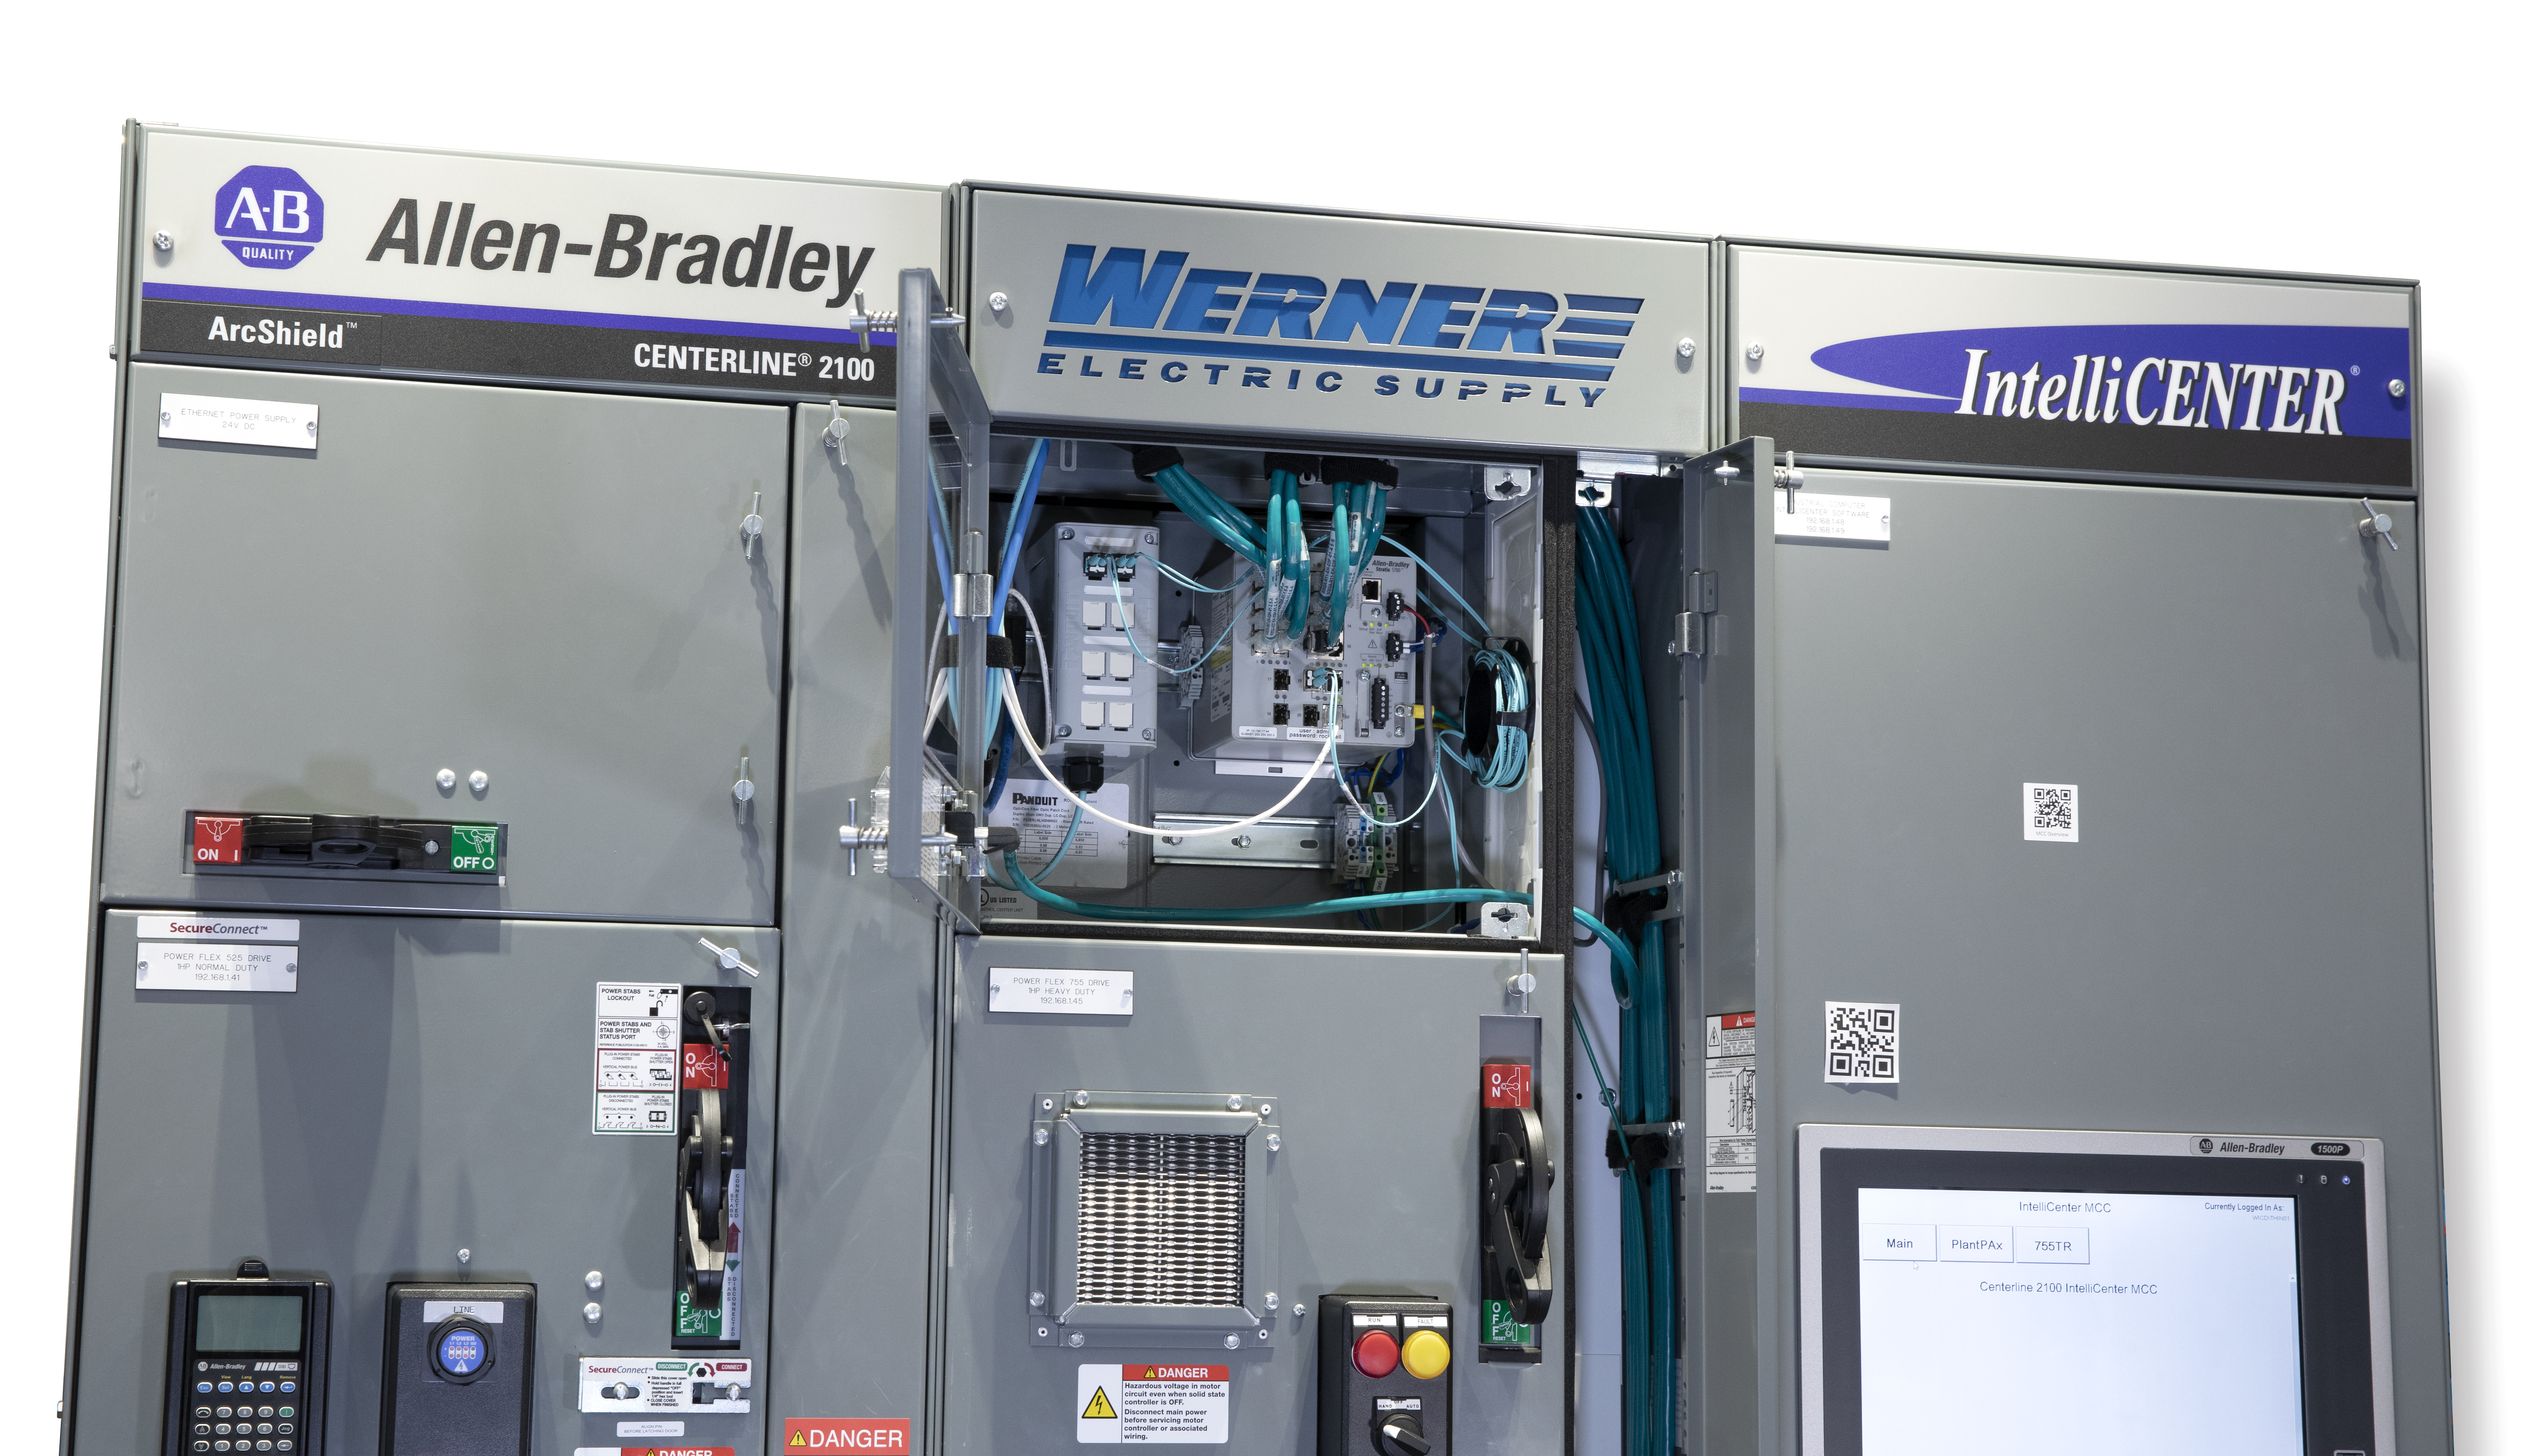 Motor Control Center (Image courtesy of Werner Electric)